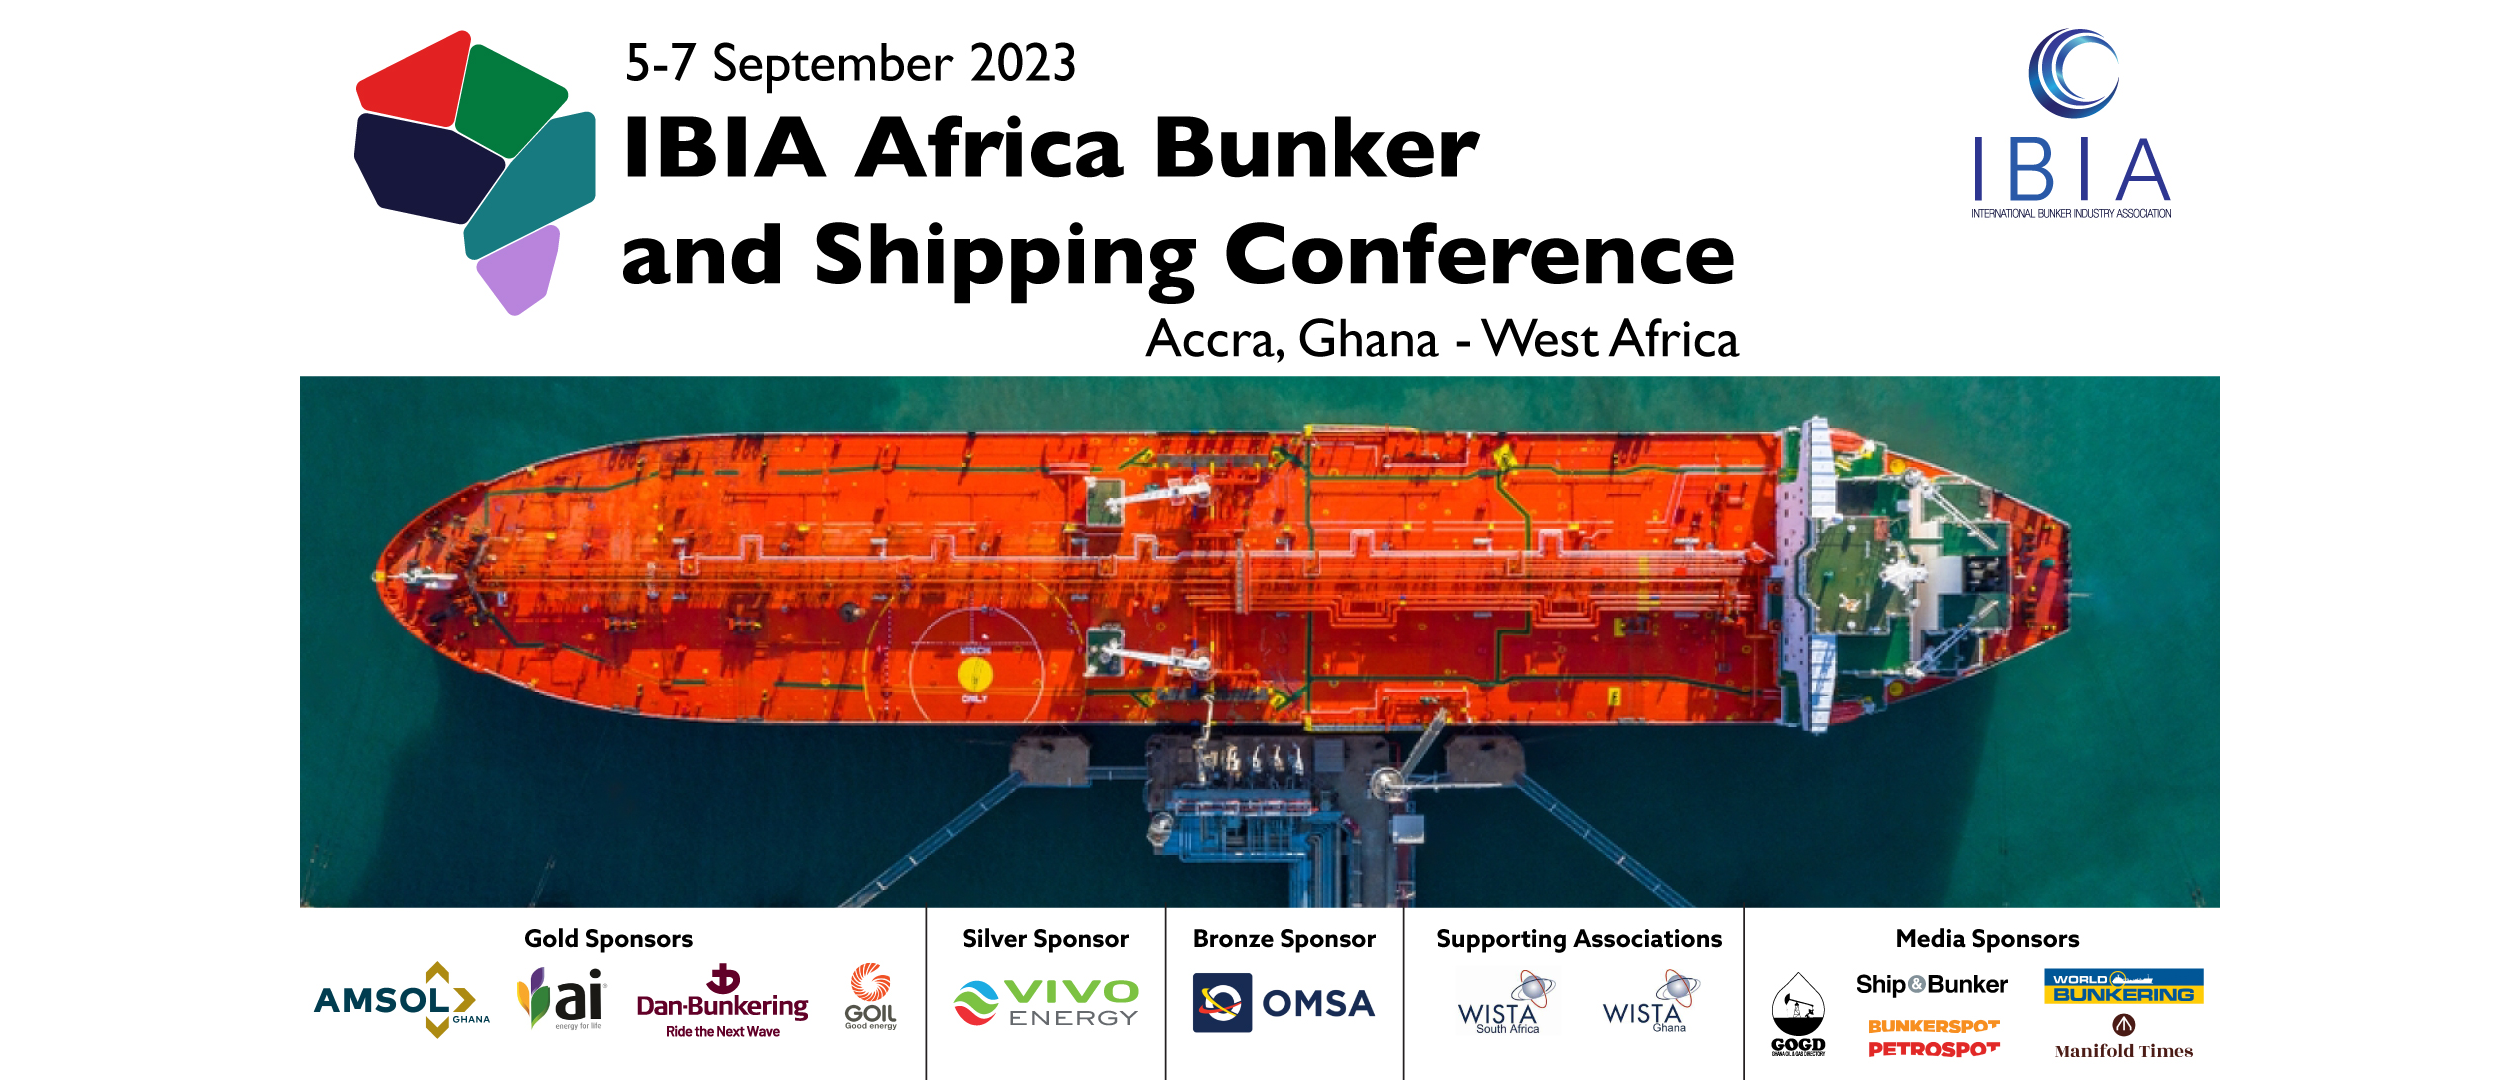 IBIA Africa Bunker and Shipping Conference – Day 1